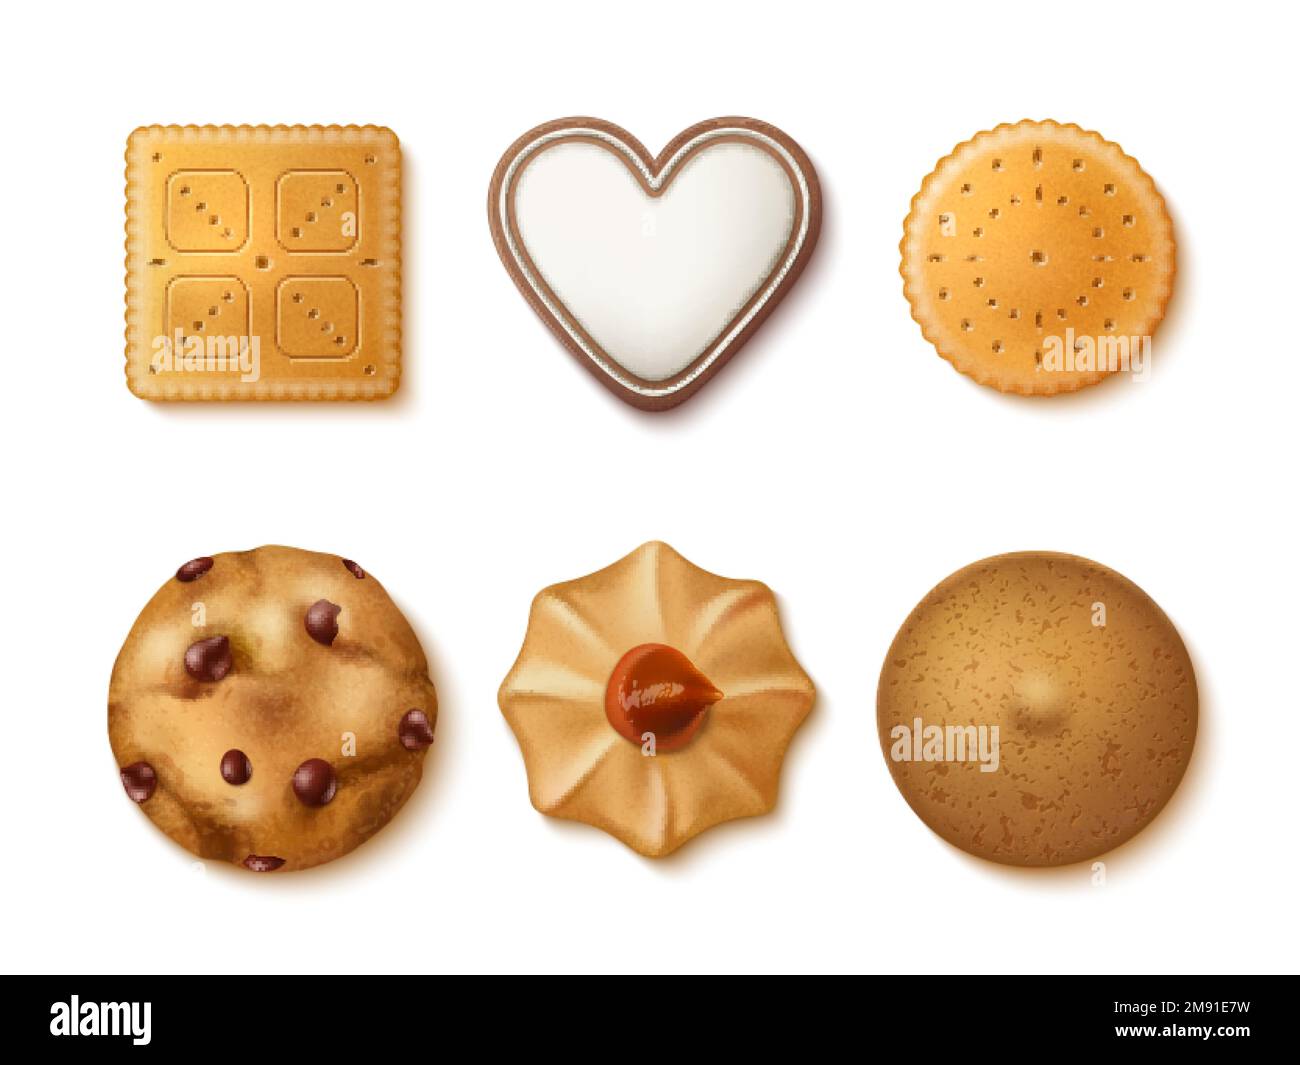 9,520 Palmers Cookie Images, Stock Photos, 3D objects, & Vectors